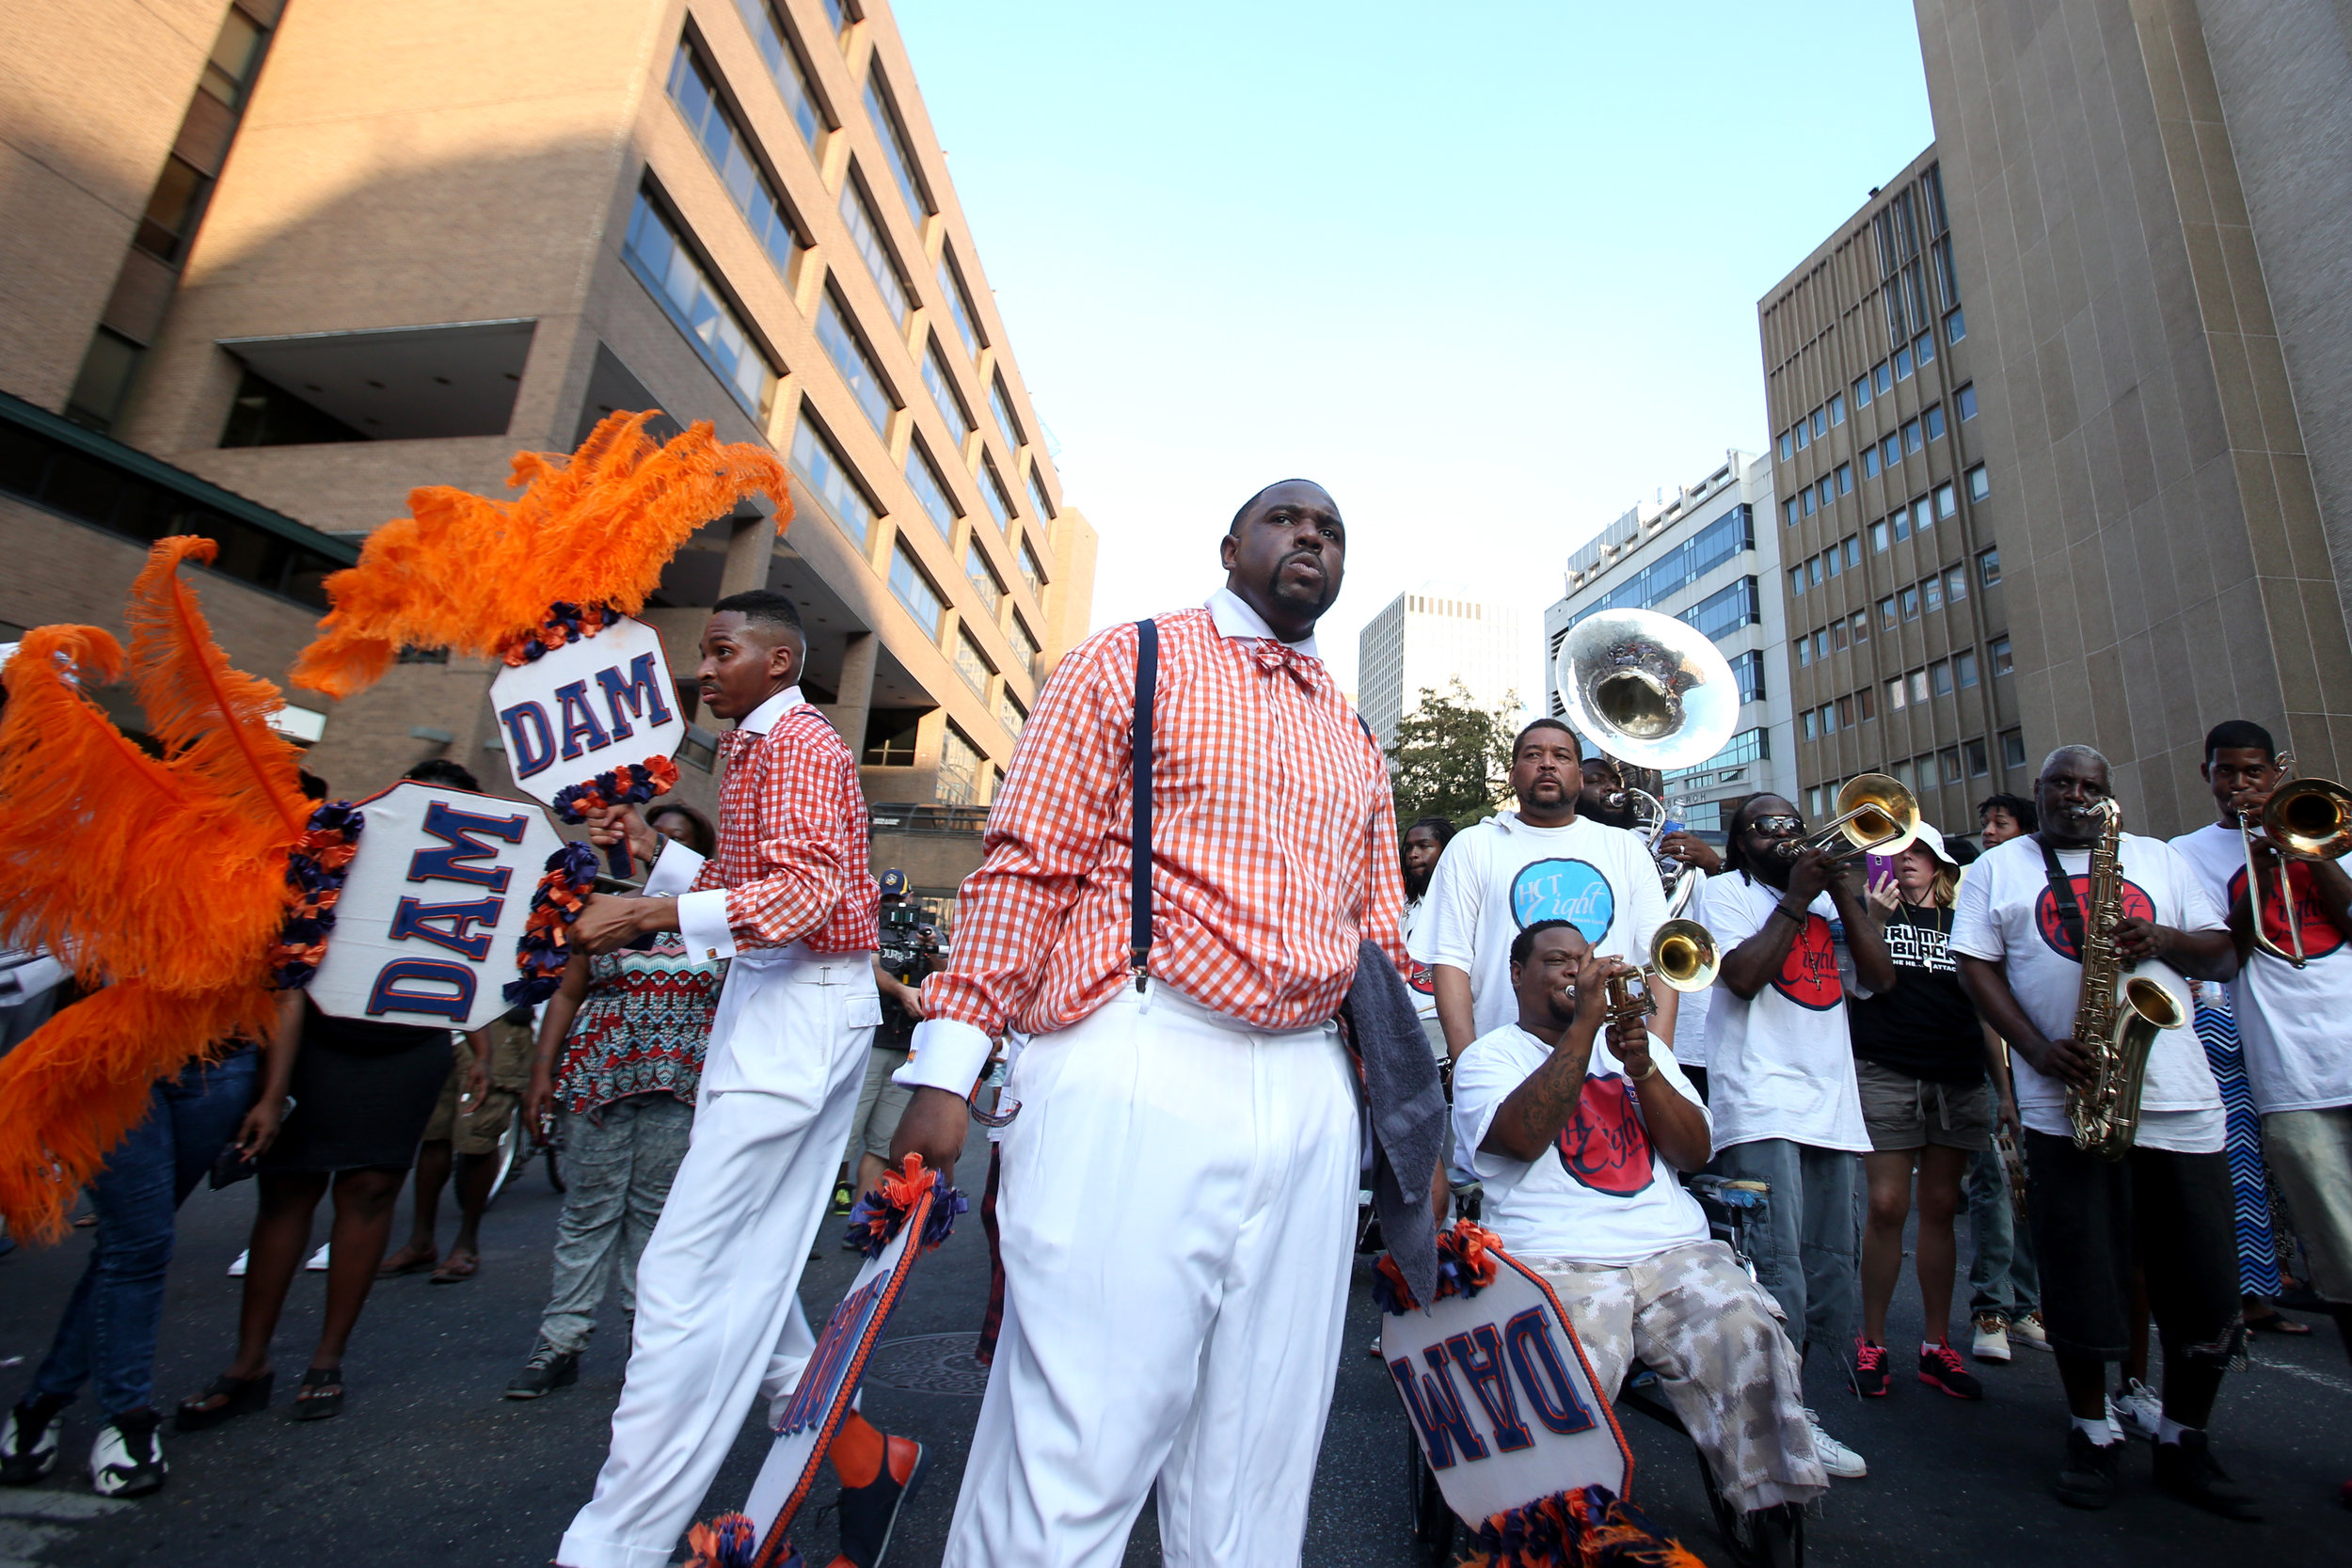  Members of the Dignified Achievable Men and Women Social Aid &amp; Pleasure Club march from Loyola Avenue to the Smoothie King Center in New Orleans, Louisiana on Saturday, August 29, 2015. More than 15 community and cultural groups and bands partic